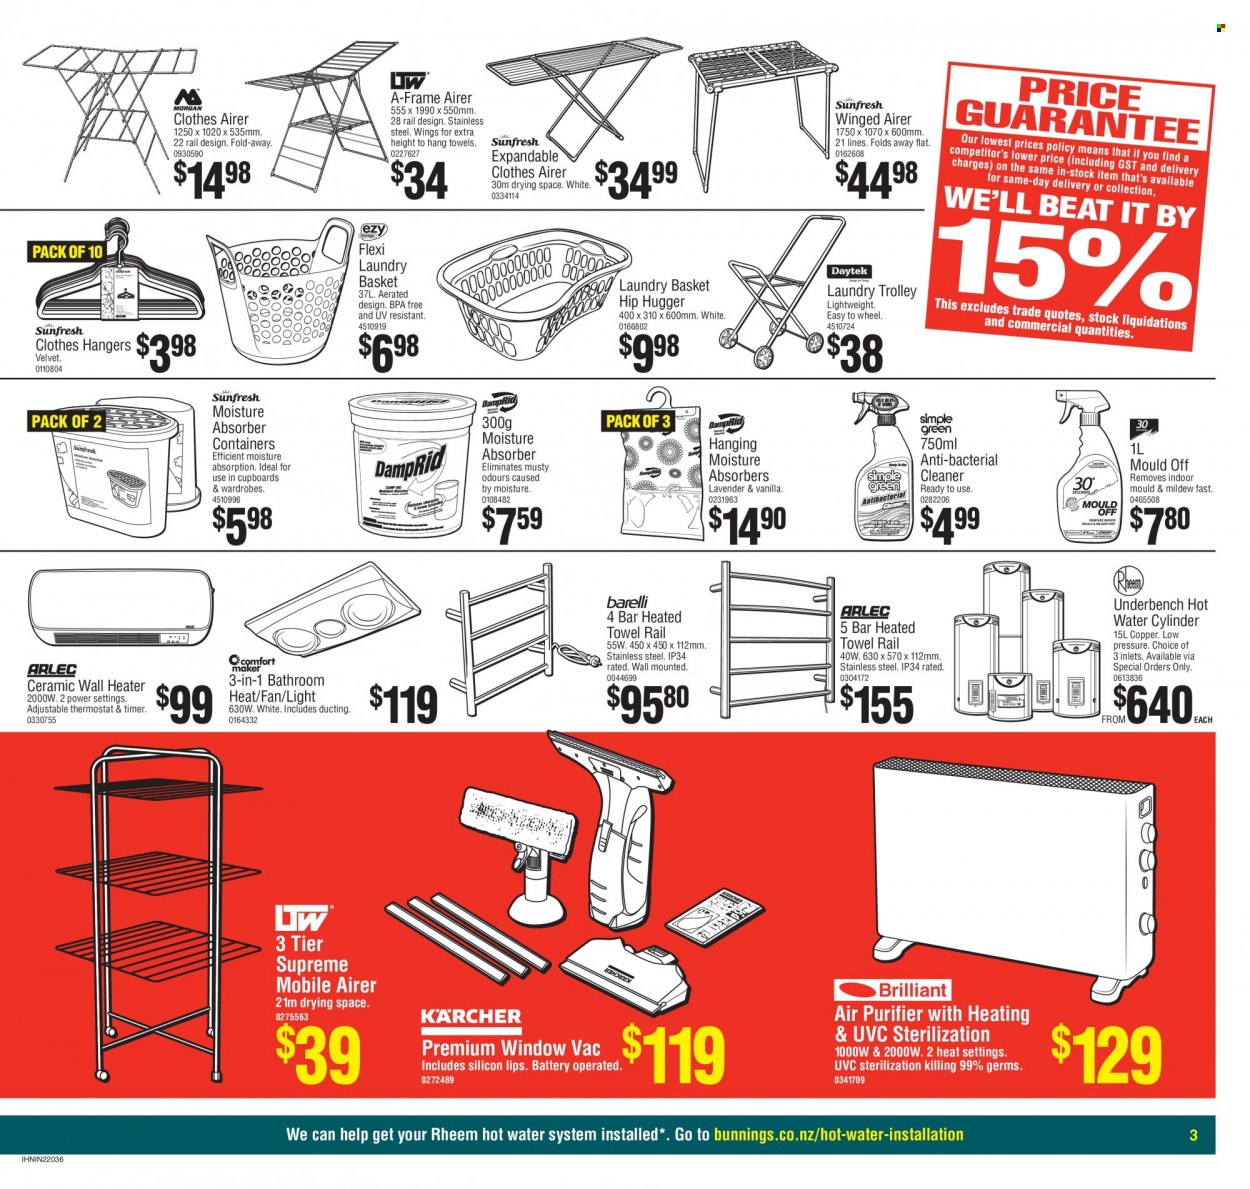 Bunnings Warehouse mailer . Page 3.